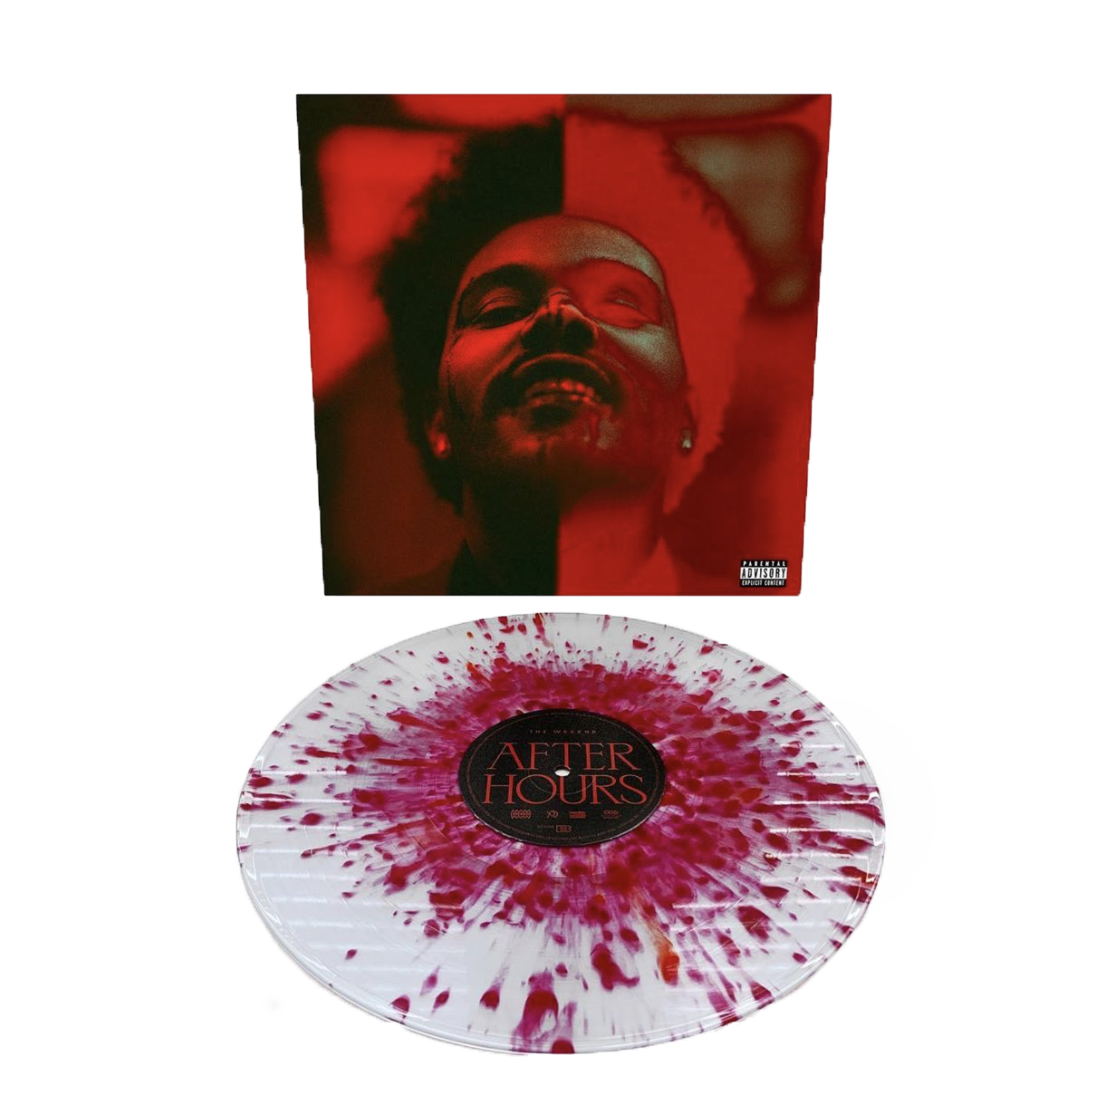  After Hours - The Weeknd 2xLP Clear with Black